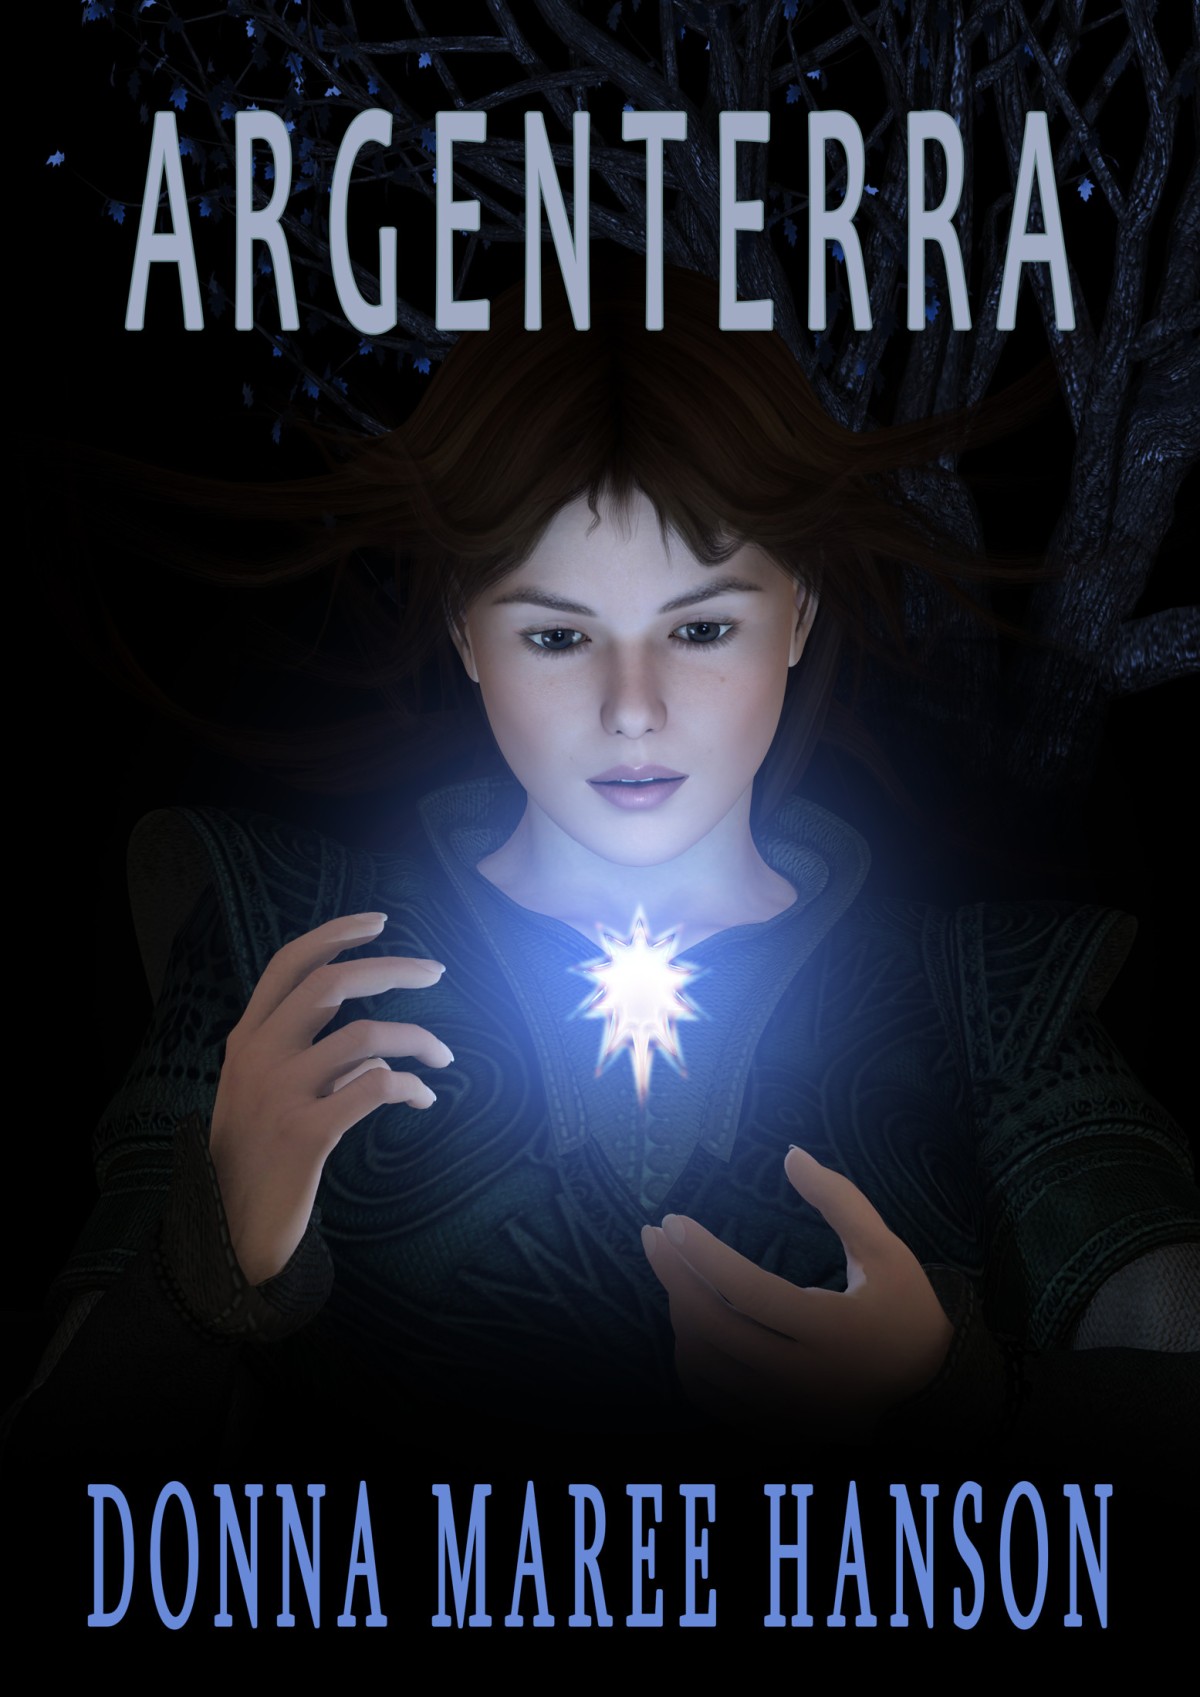 How NOT to write #Dystopian  #BookReview ARGENTERRA by @DonnaMHanson #TuesdayBookBlog